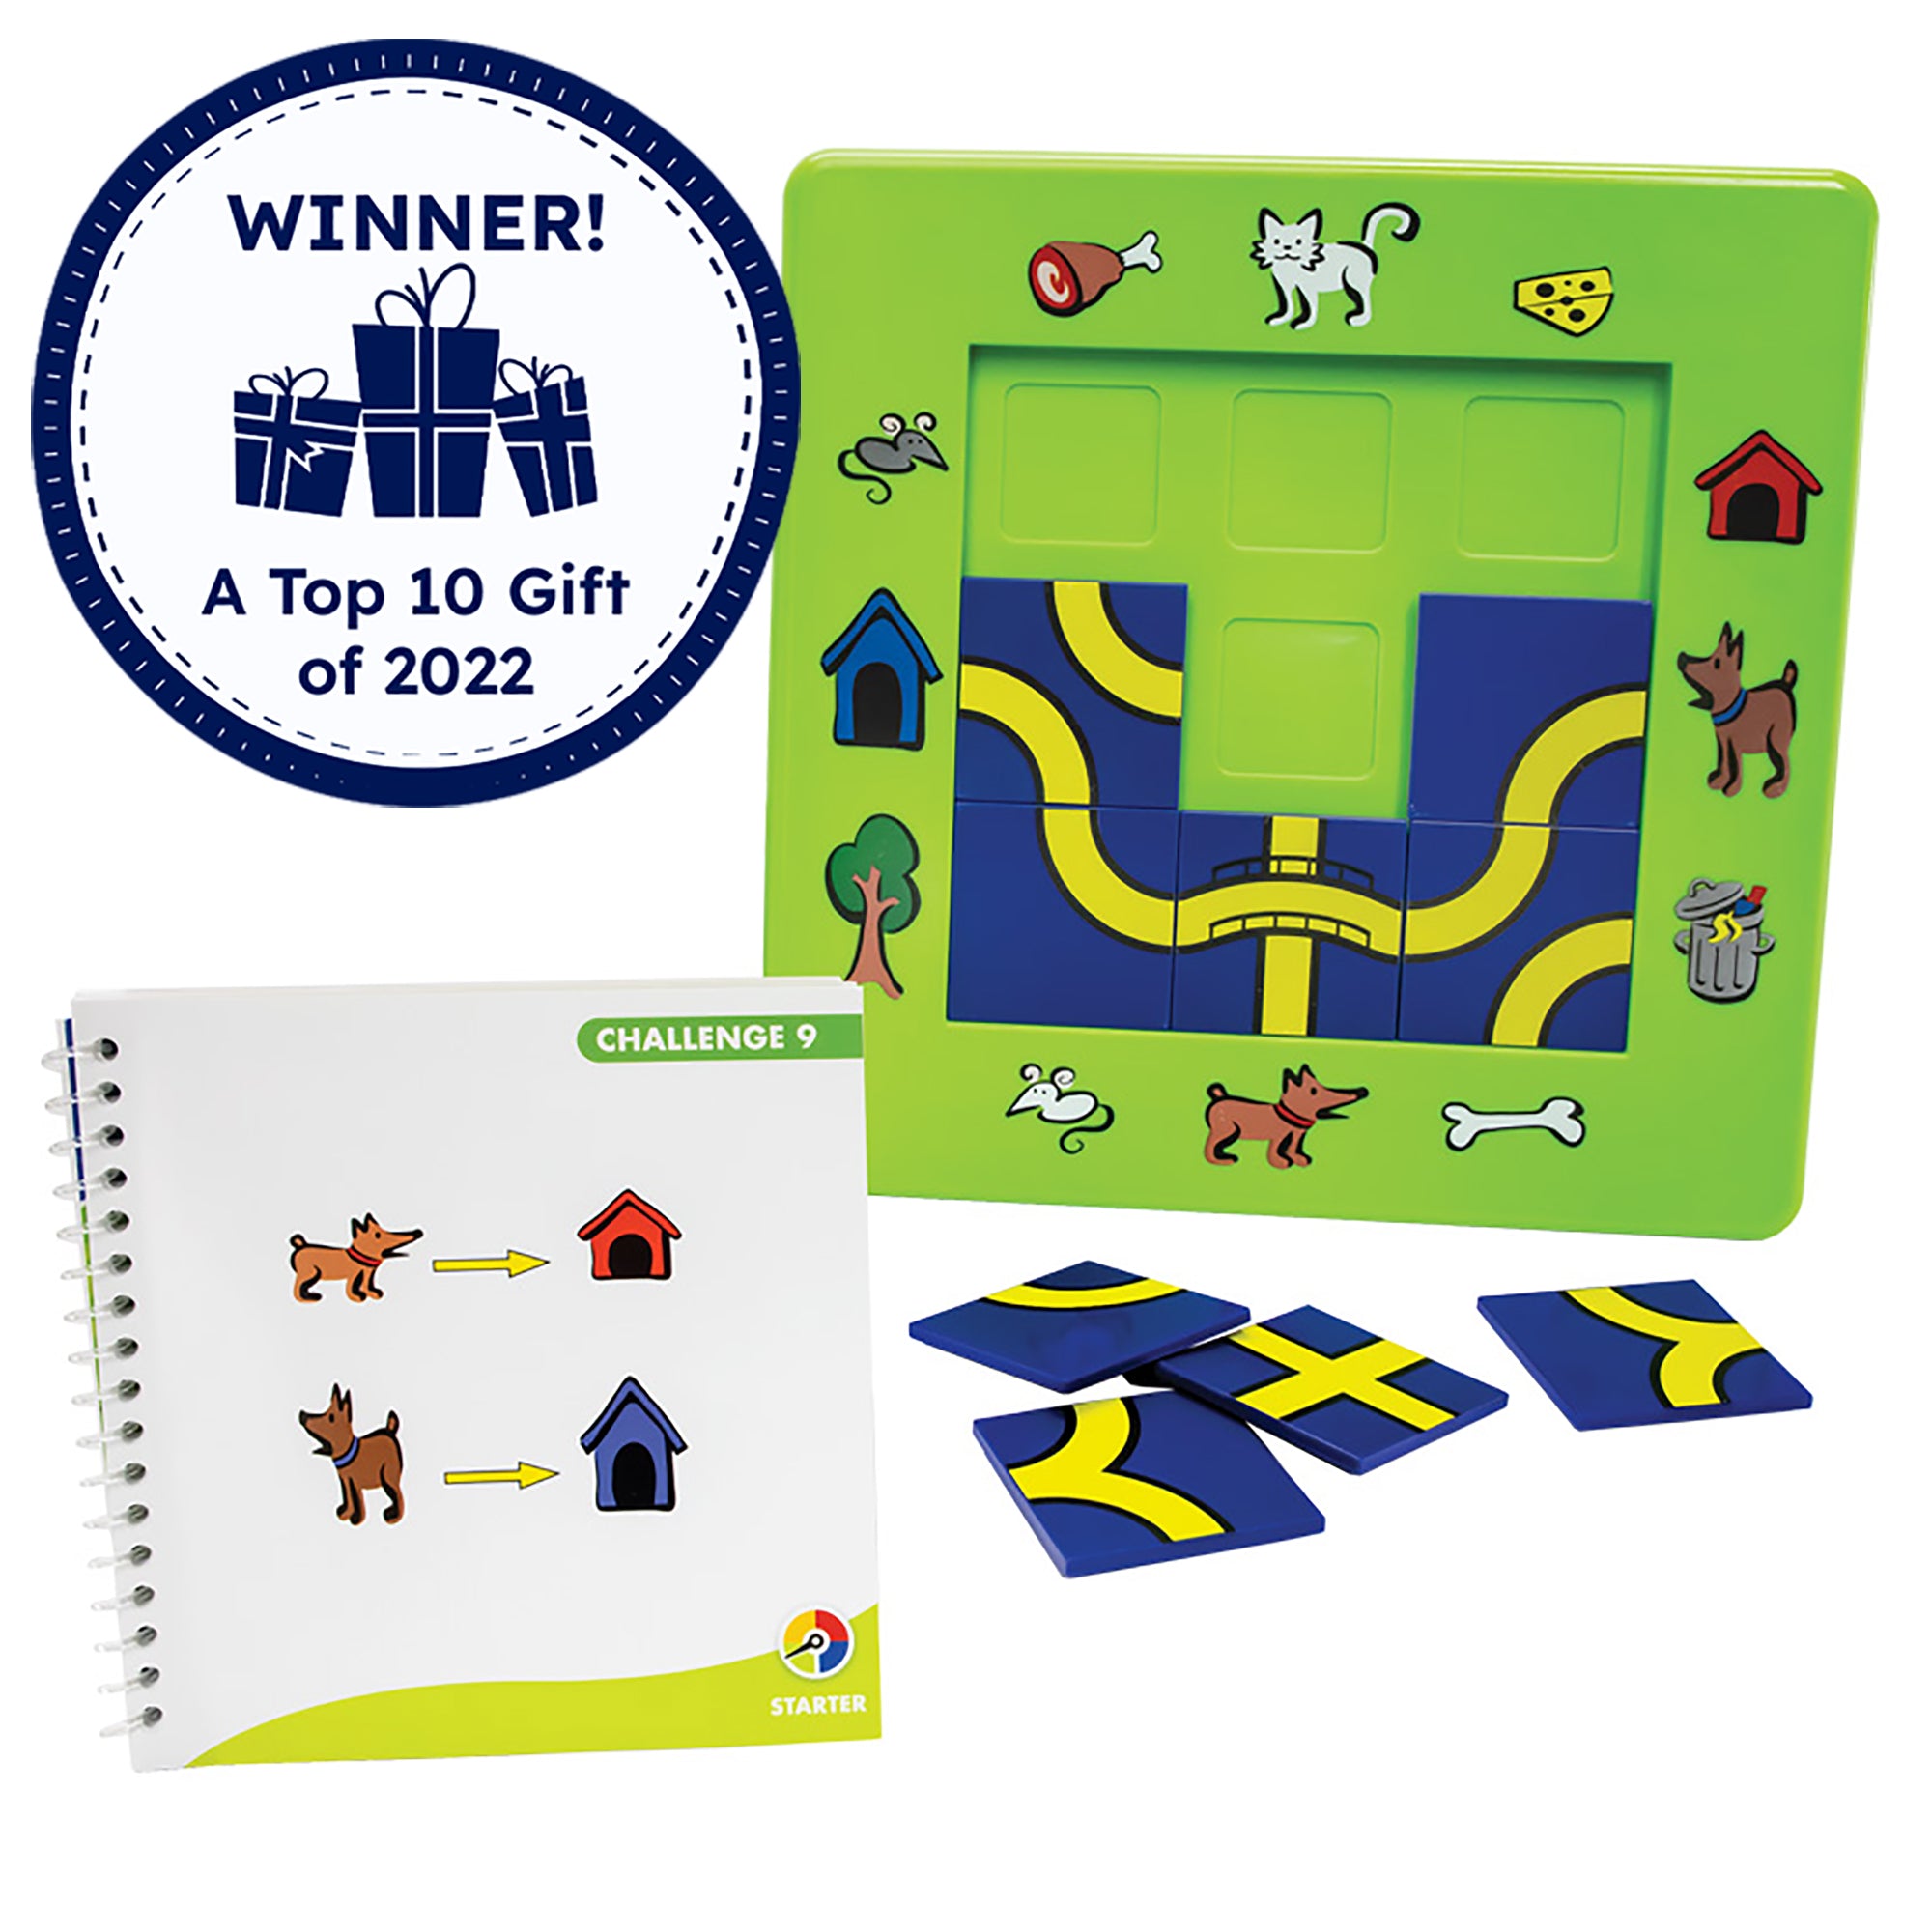 The Cat and Mouse game in play. The game board is bright green with illustrations around the board of pets, outside objects, pet snacks, and pet homes. There are blue and yellow square pathway pieces placed in the middle of the board. There are 4 more square pieces laid out in front of the board, waiting to be placed on the board. In front is the instruction booklet, open to show a challenge. There is a badge reading “Winner! A top 10 gift of 2022” in the top-left.